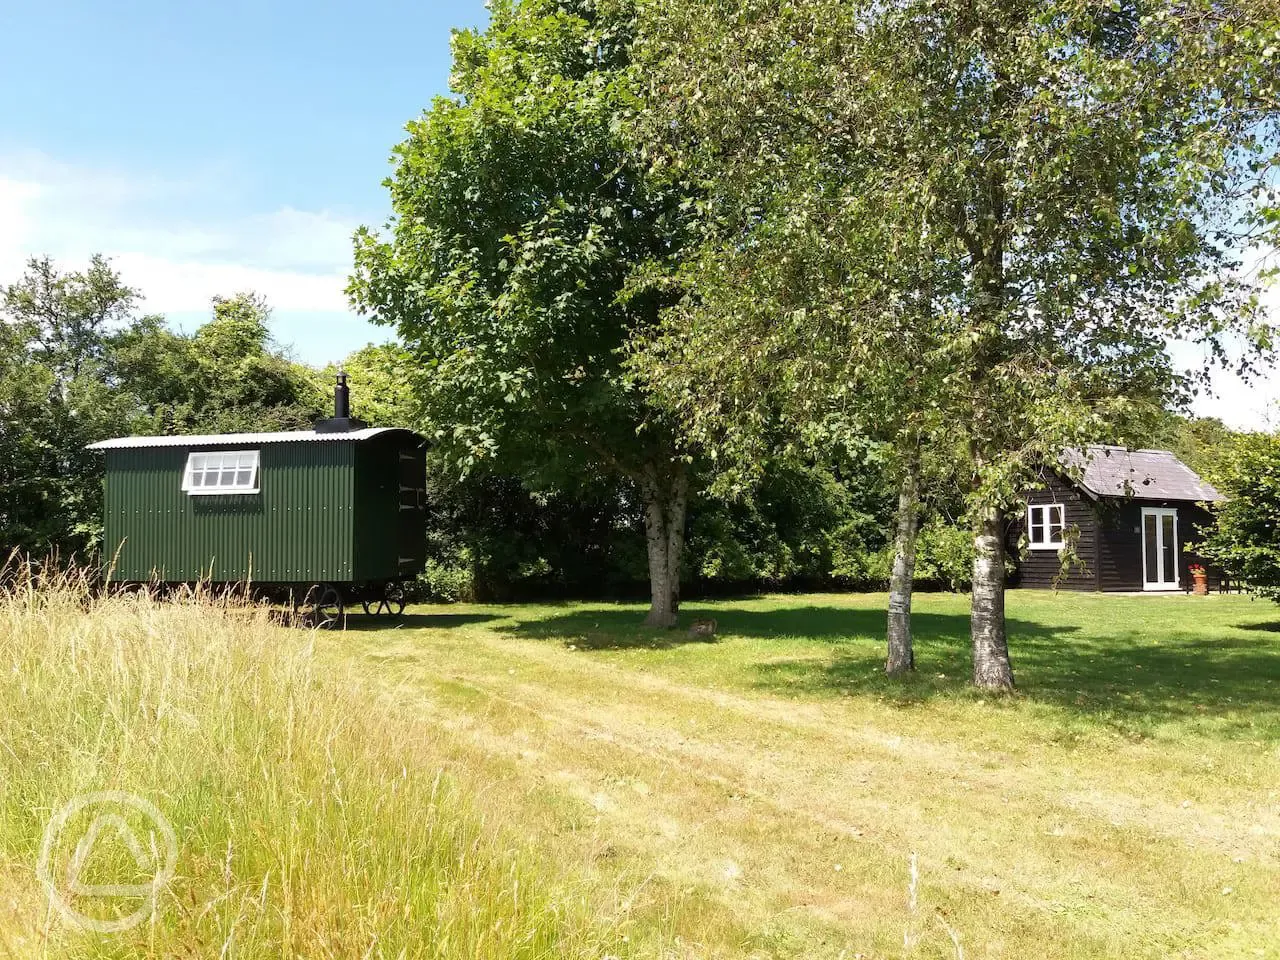 Shepherds Hut 'Far from the madding crowd'